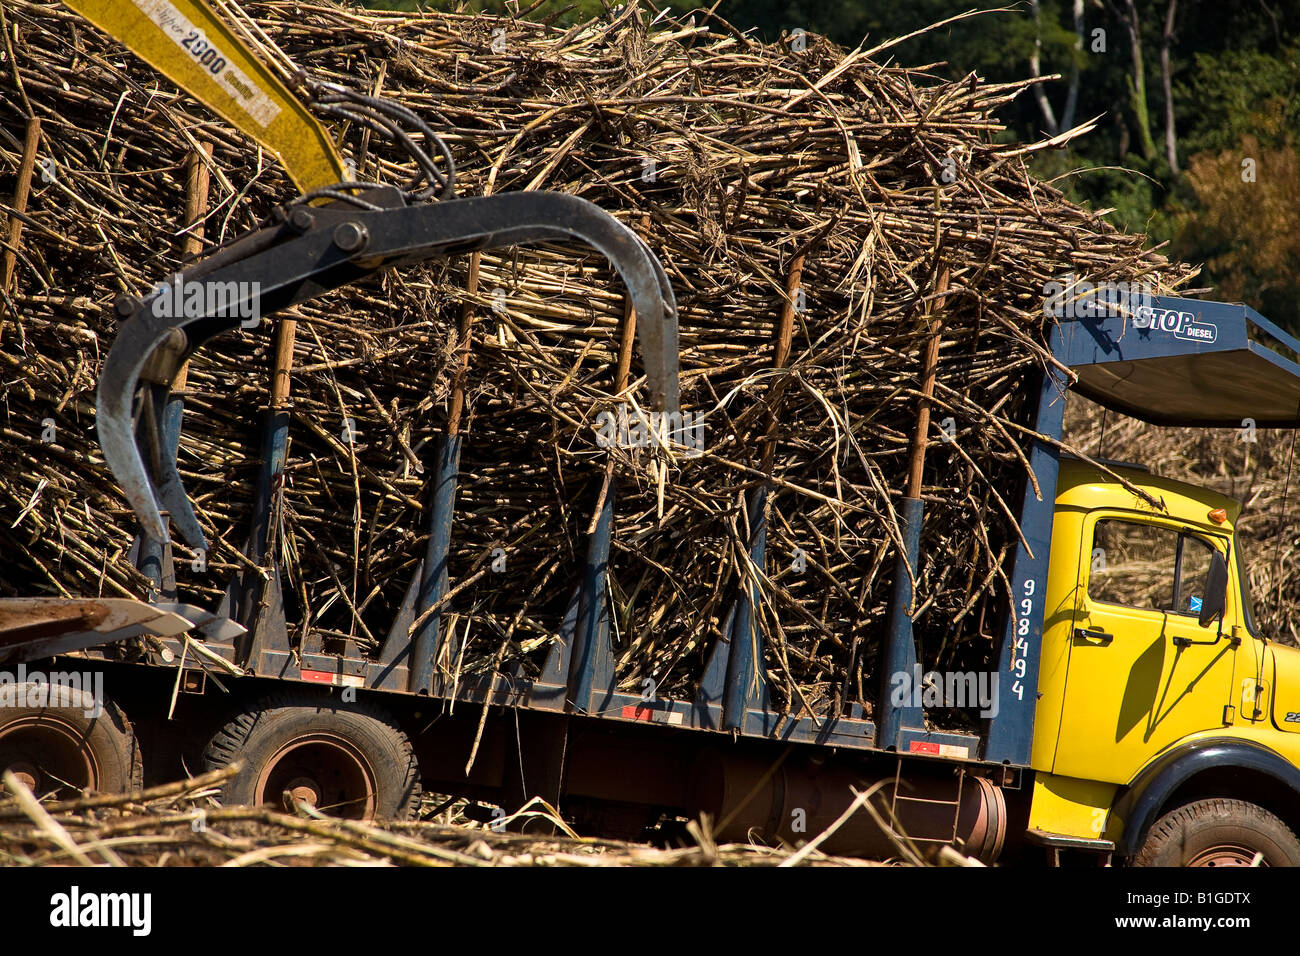 Machinery gathers sugarcane and loads truck for transporting to the mill for ethanol and sugar production Brazil May 2008 Stock Photo